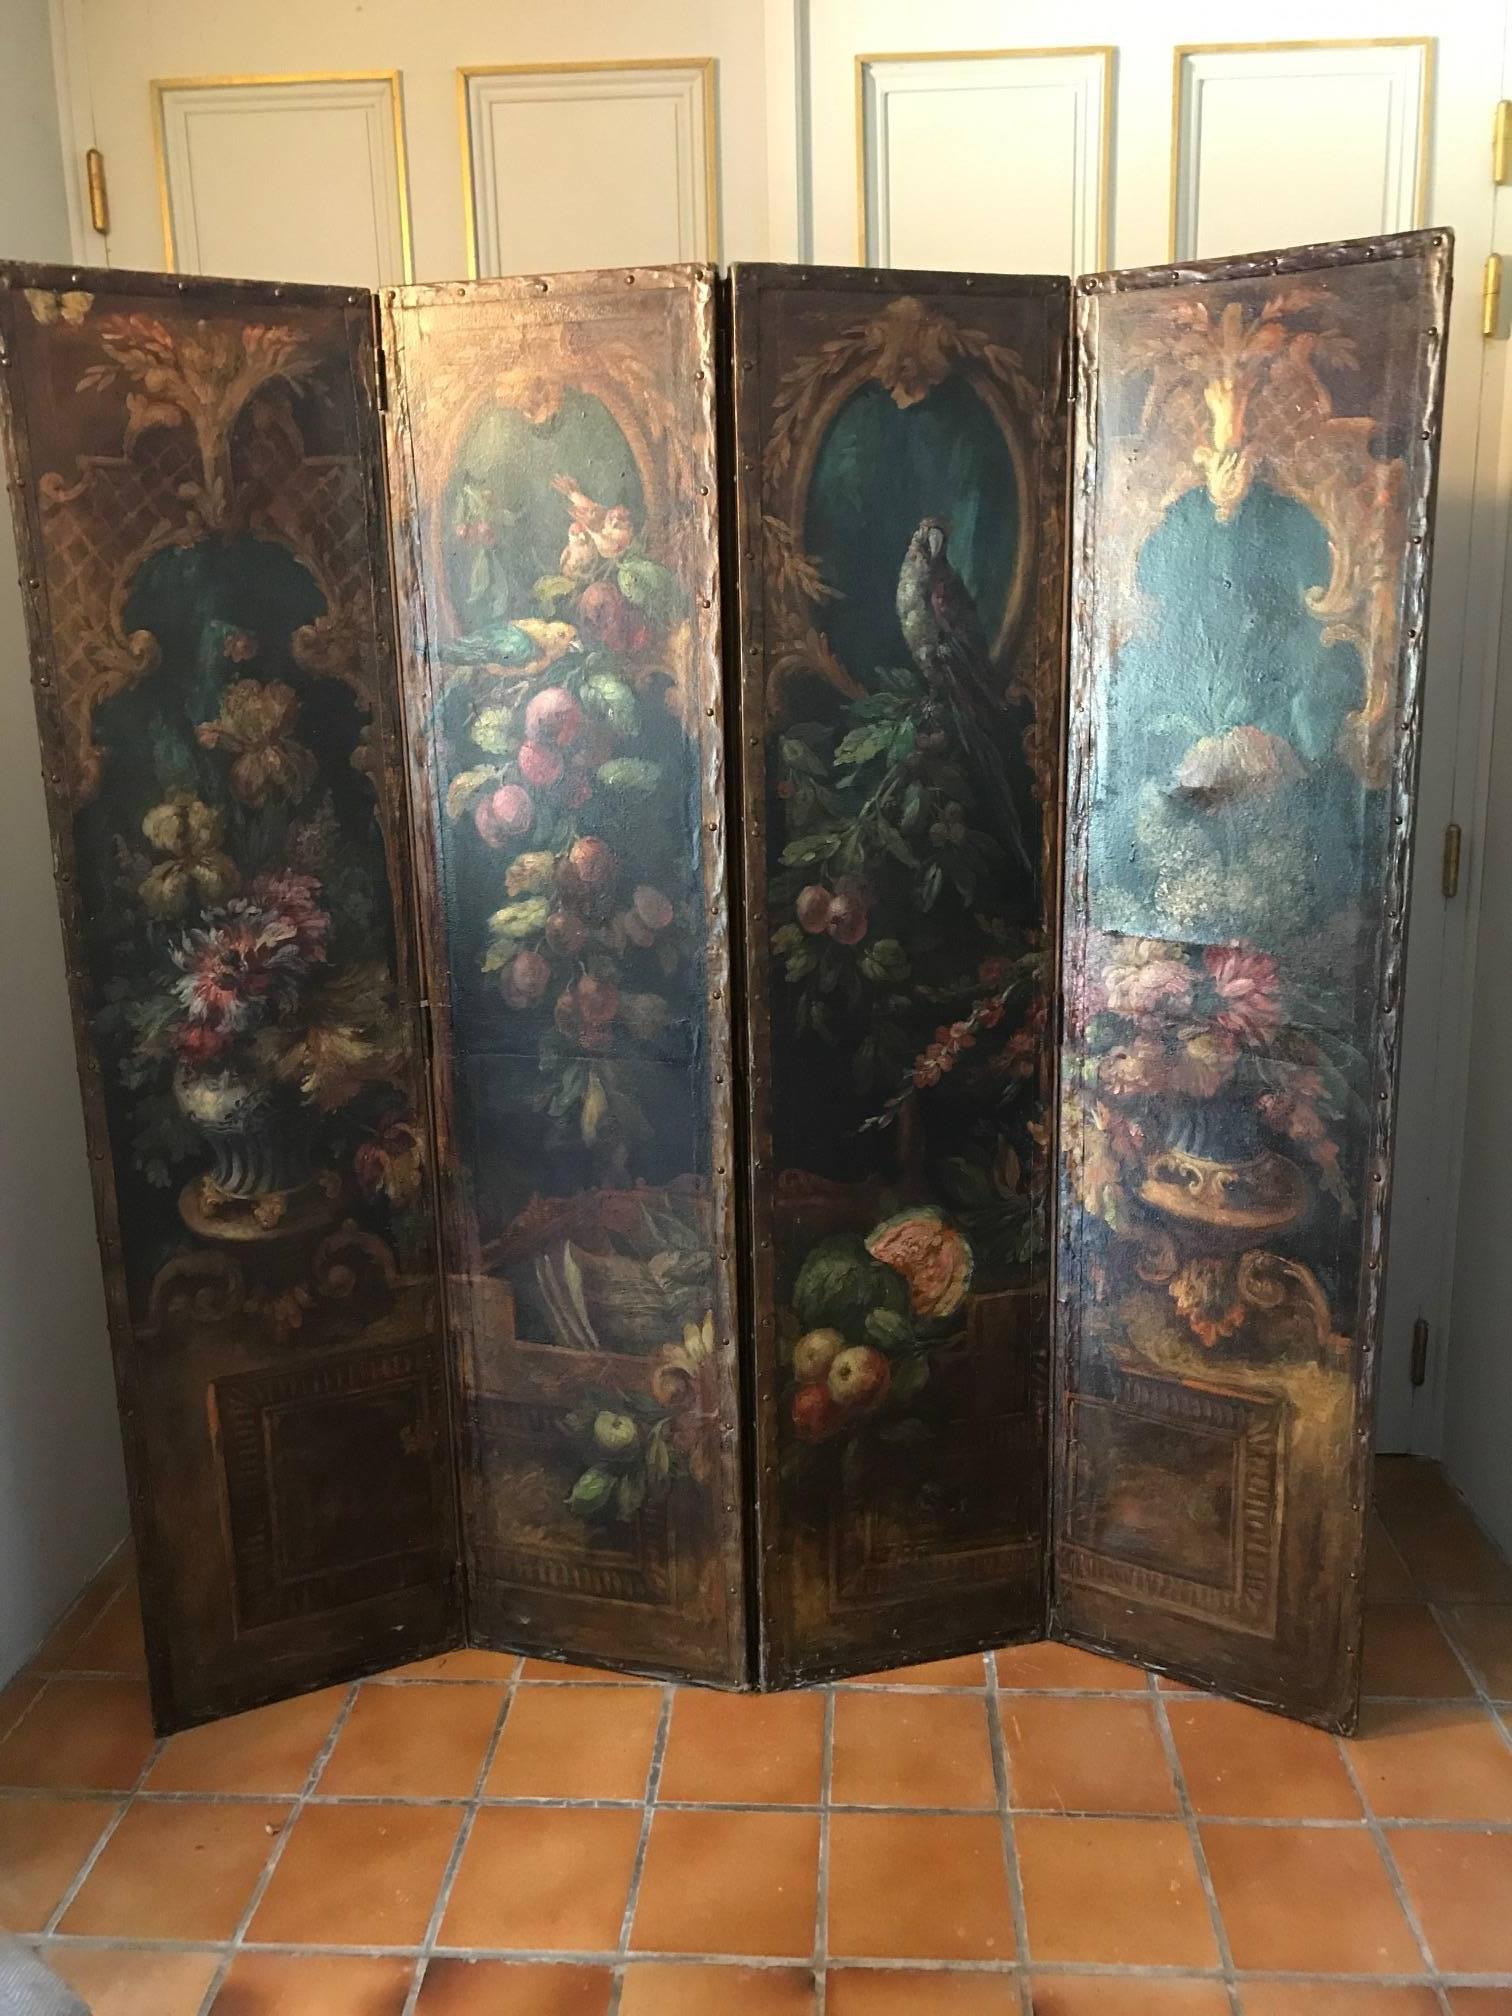 A beautiful four panel folding screen with exquisite foliage and bird decoration. The four panels have simple leather lining. The screen is French and dates from the late 18th early 19th century. As with most screens it has some repairs to the